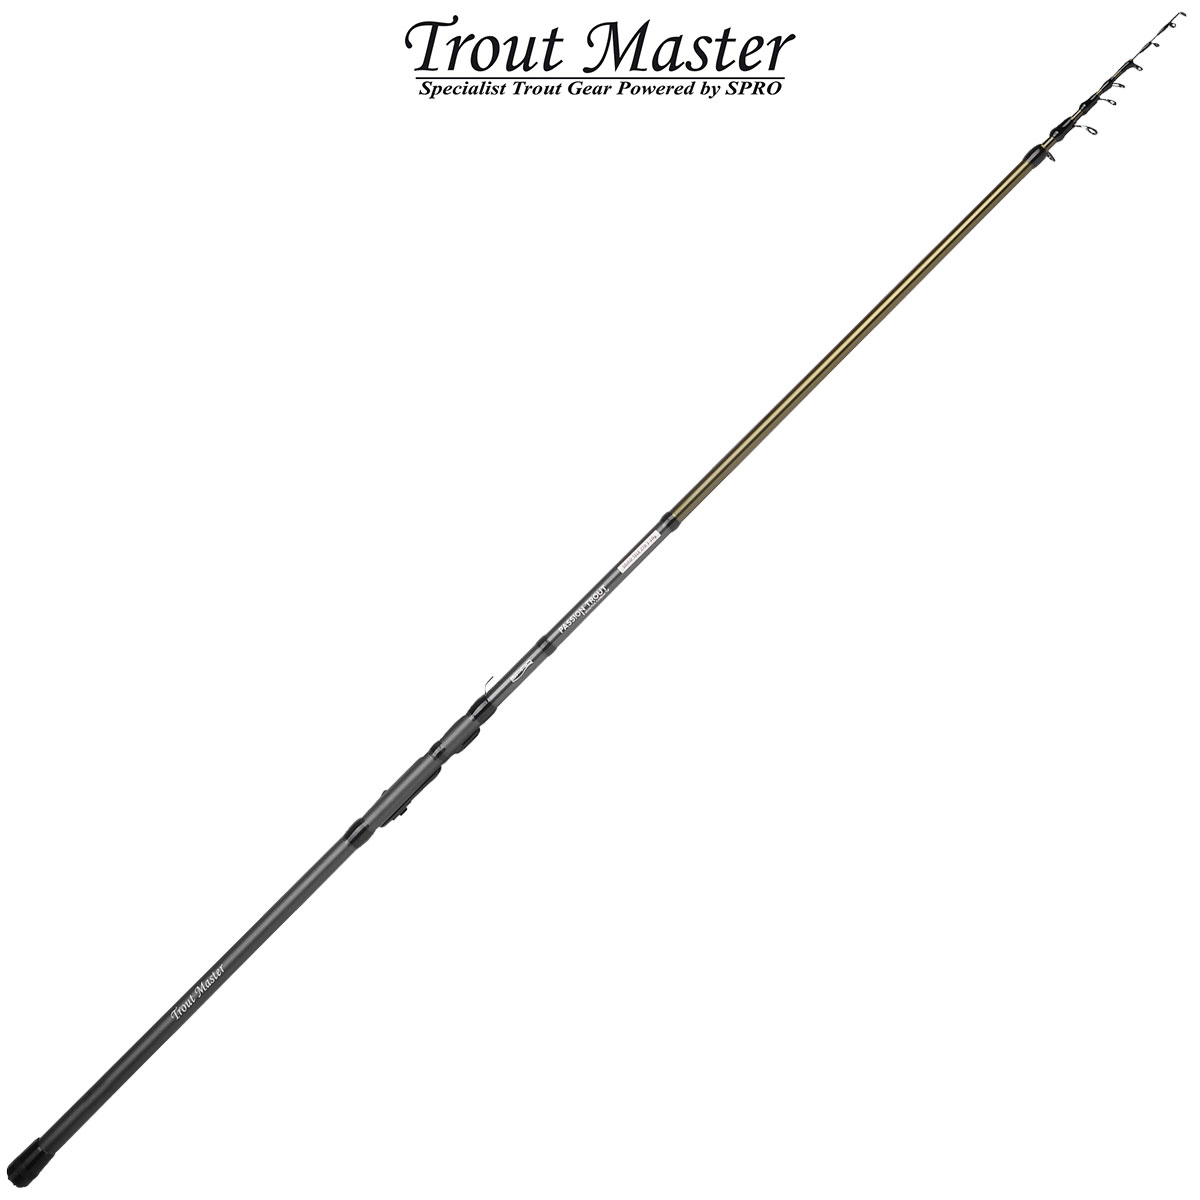 SPRO Trout Master PASSION TROUT SBIRO TELE